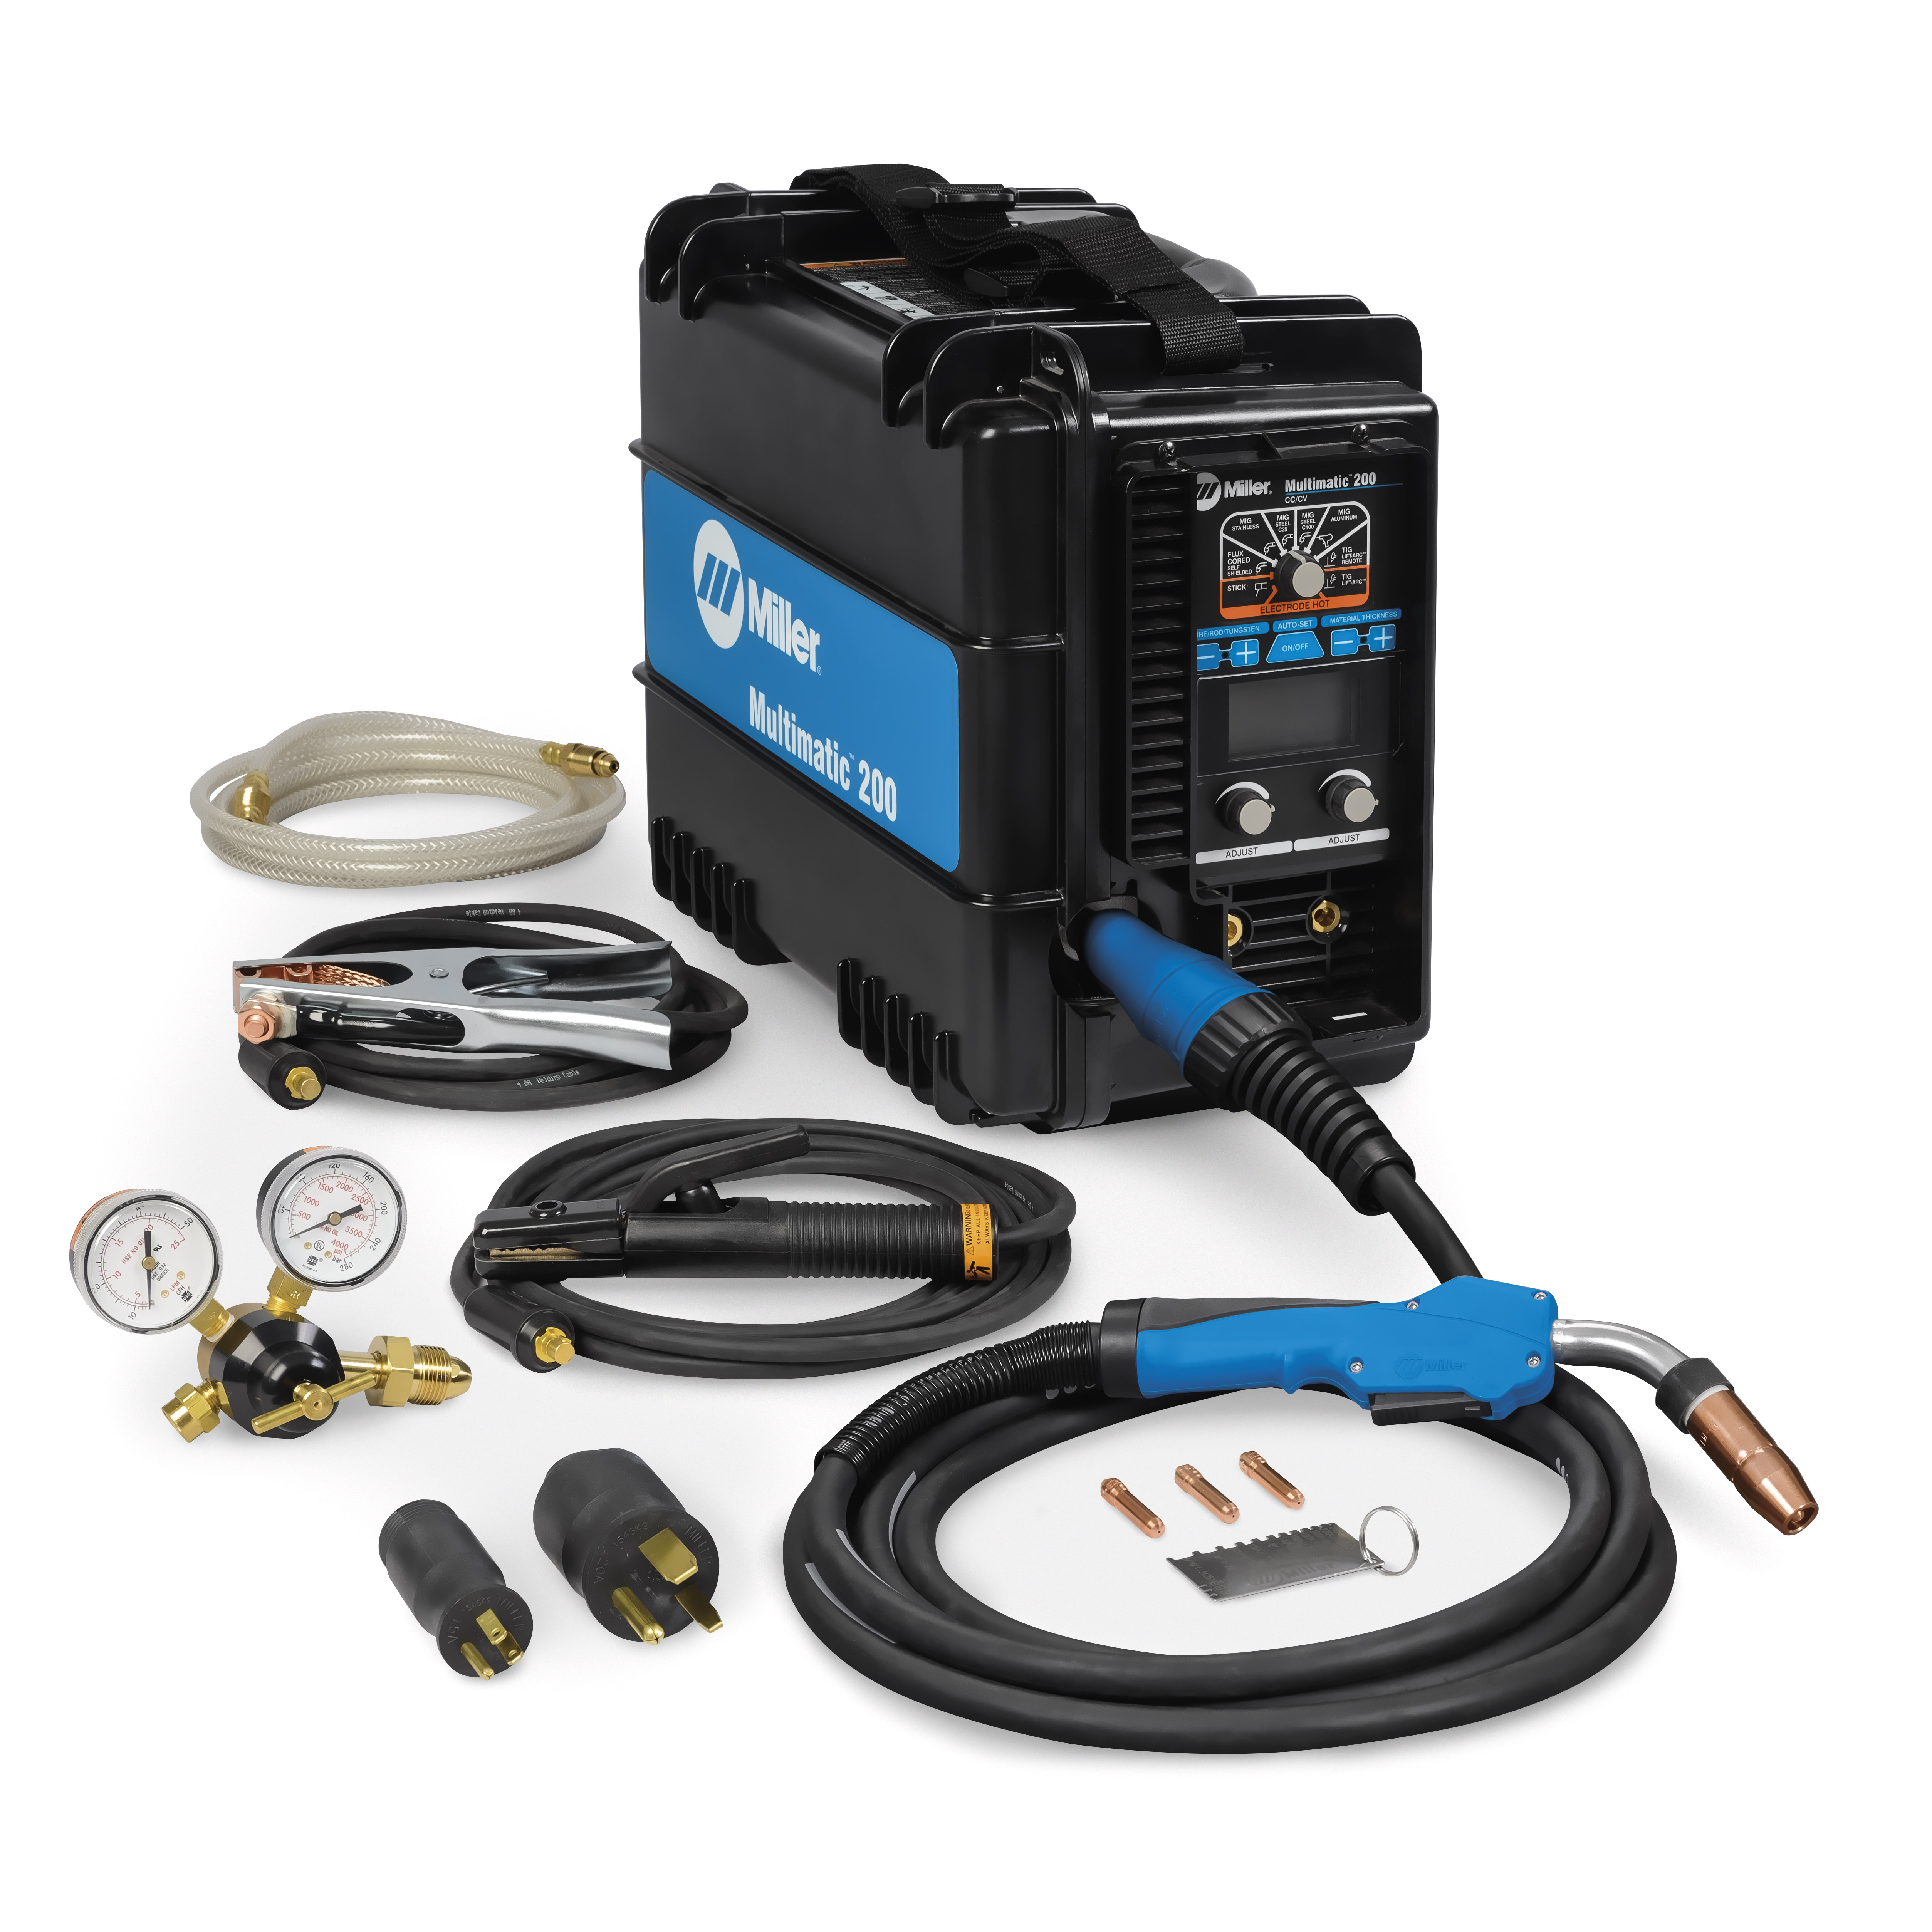 Miller Multimatic 200 Multiprocess Welder With TIG Contractor Kit for sale online